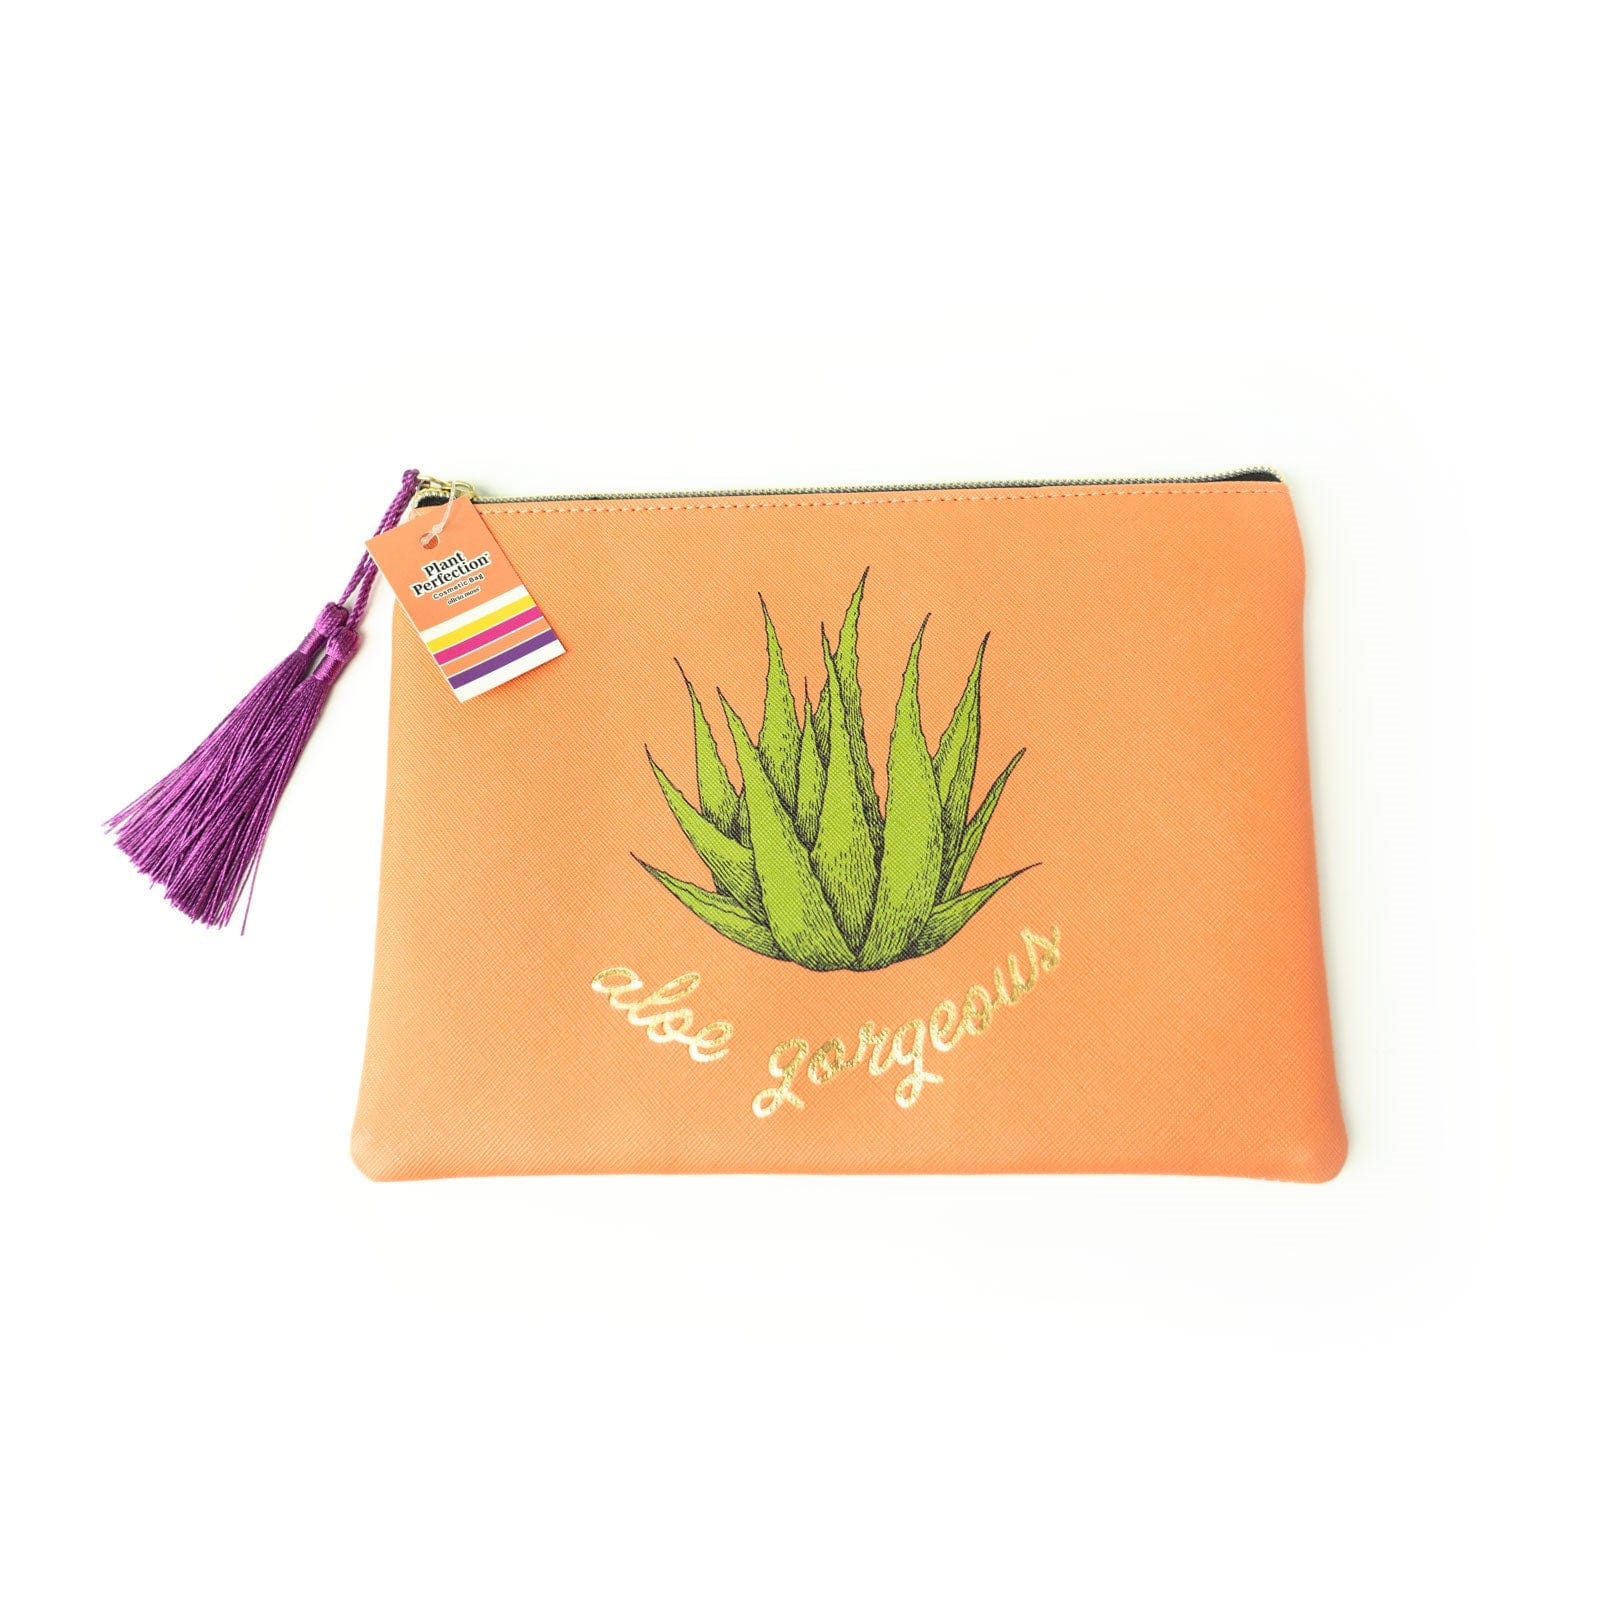 Plant Perfection Cosmetic Bag-More Styles - Infinity Raine